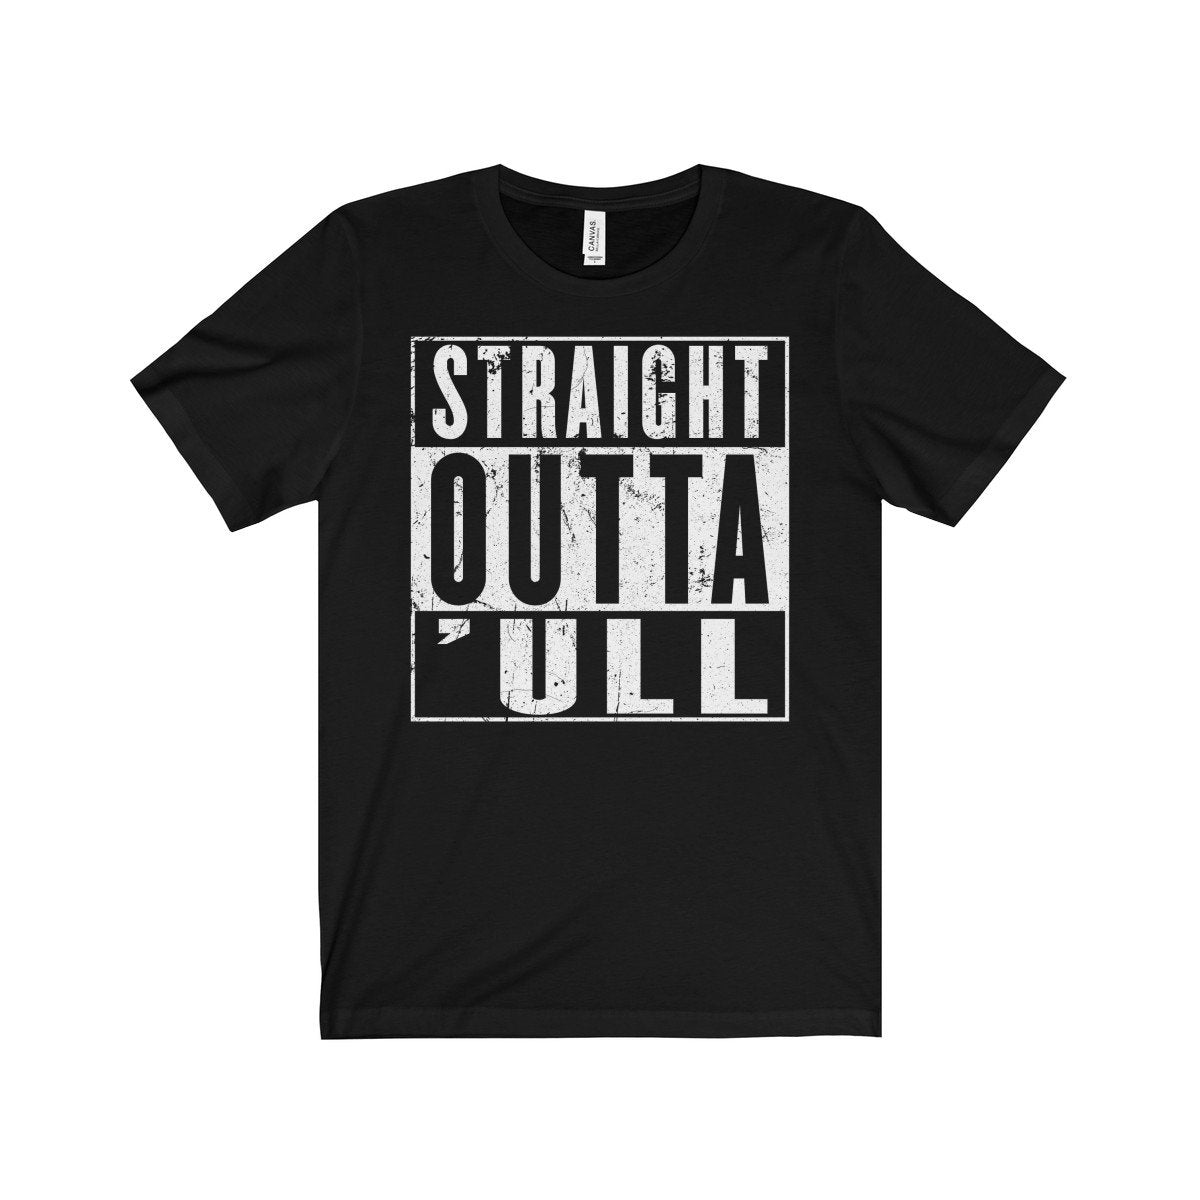 Funny Hull T-Shirt, Straight Outta &#39;ull (Hull) White Funny Compton NWA Style Unisex Jersey Short Sleeve Tee Shirt Top